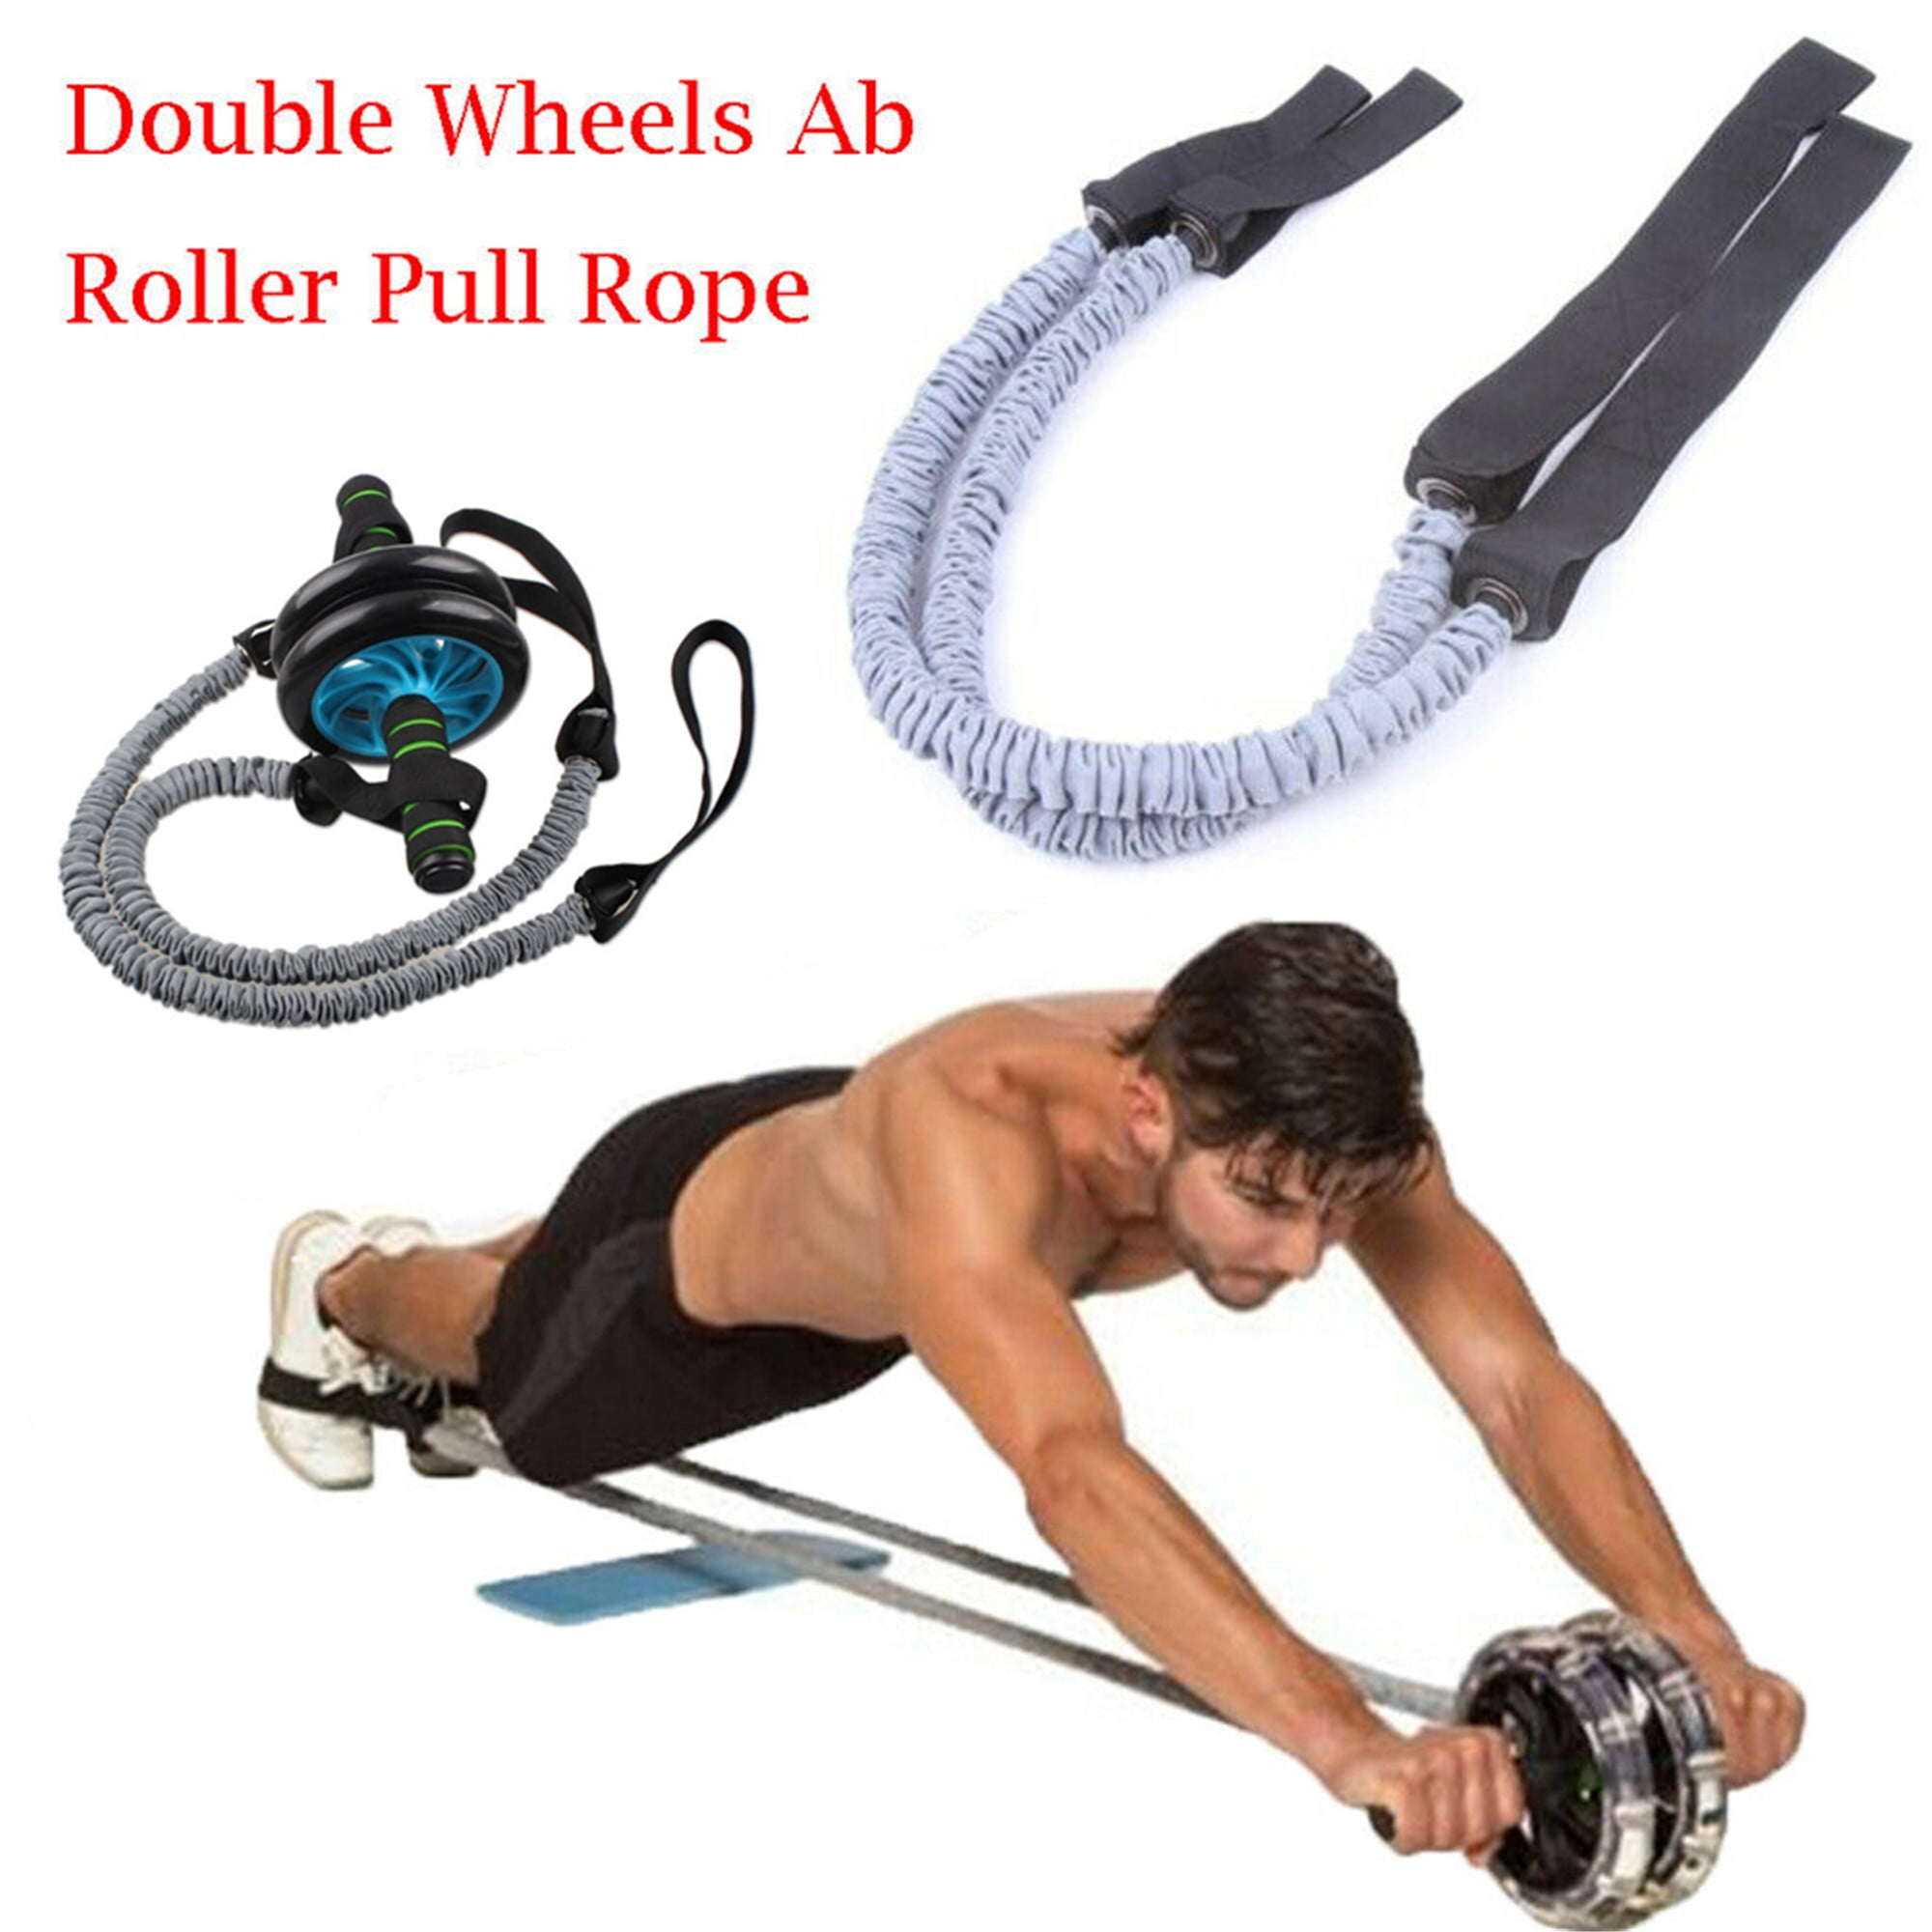 Dual Ab Wheel For Abs Abdominal Roller Workout Exercise R4U2 Fitness Red T4Y8 